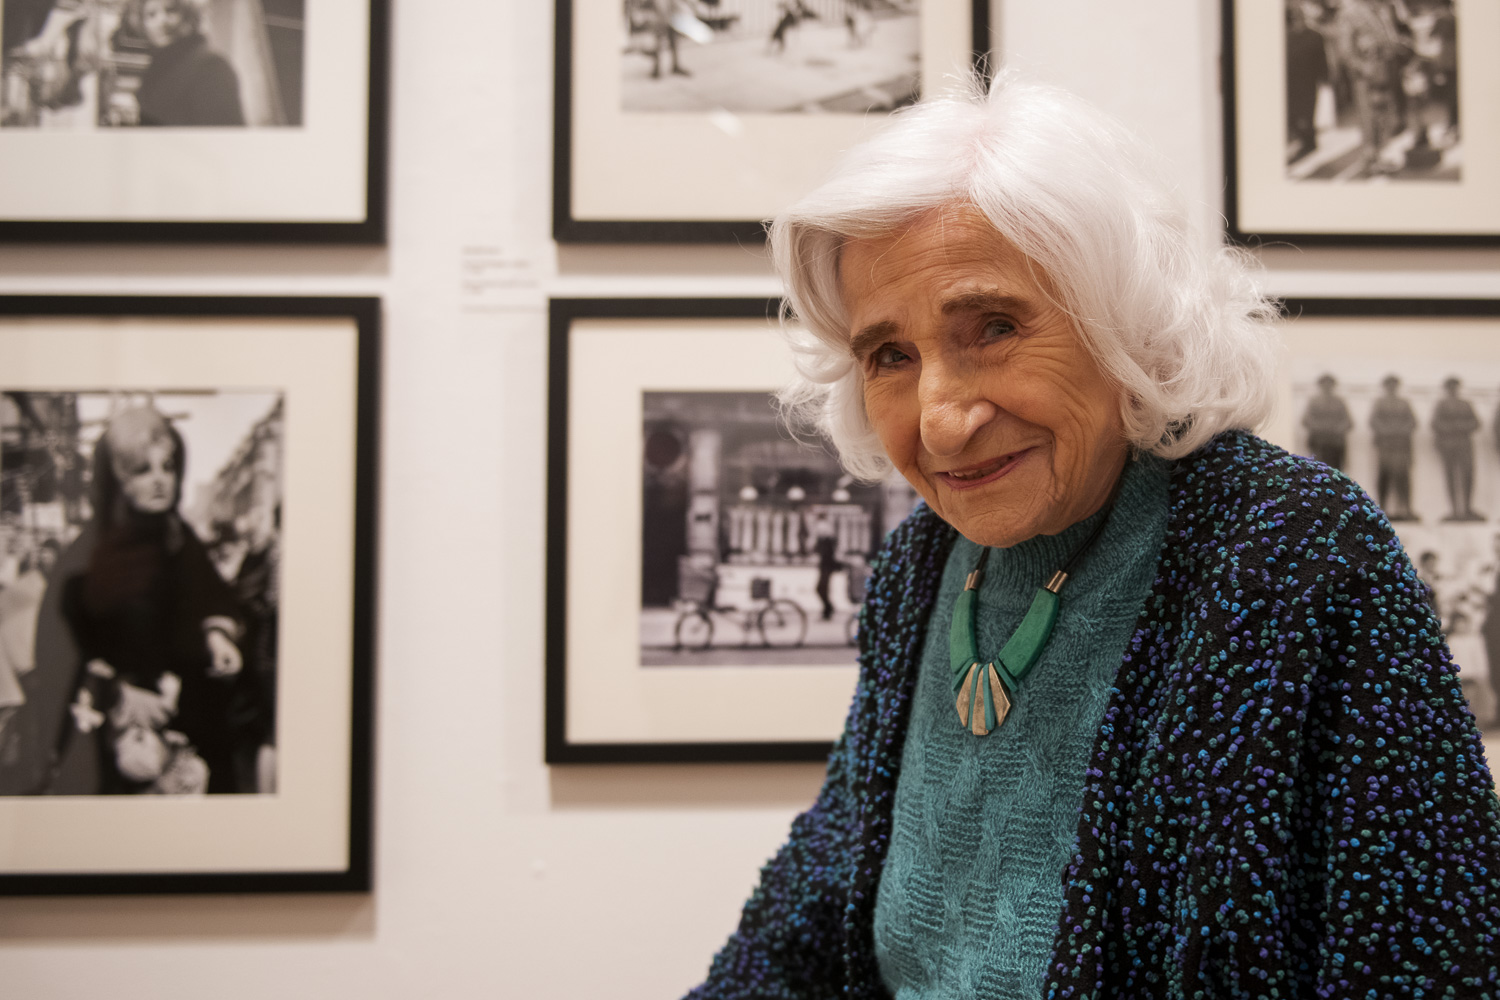 The photographer Dorothy Bohm stands in front of her framed photographs, smiling